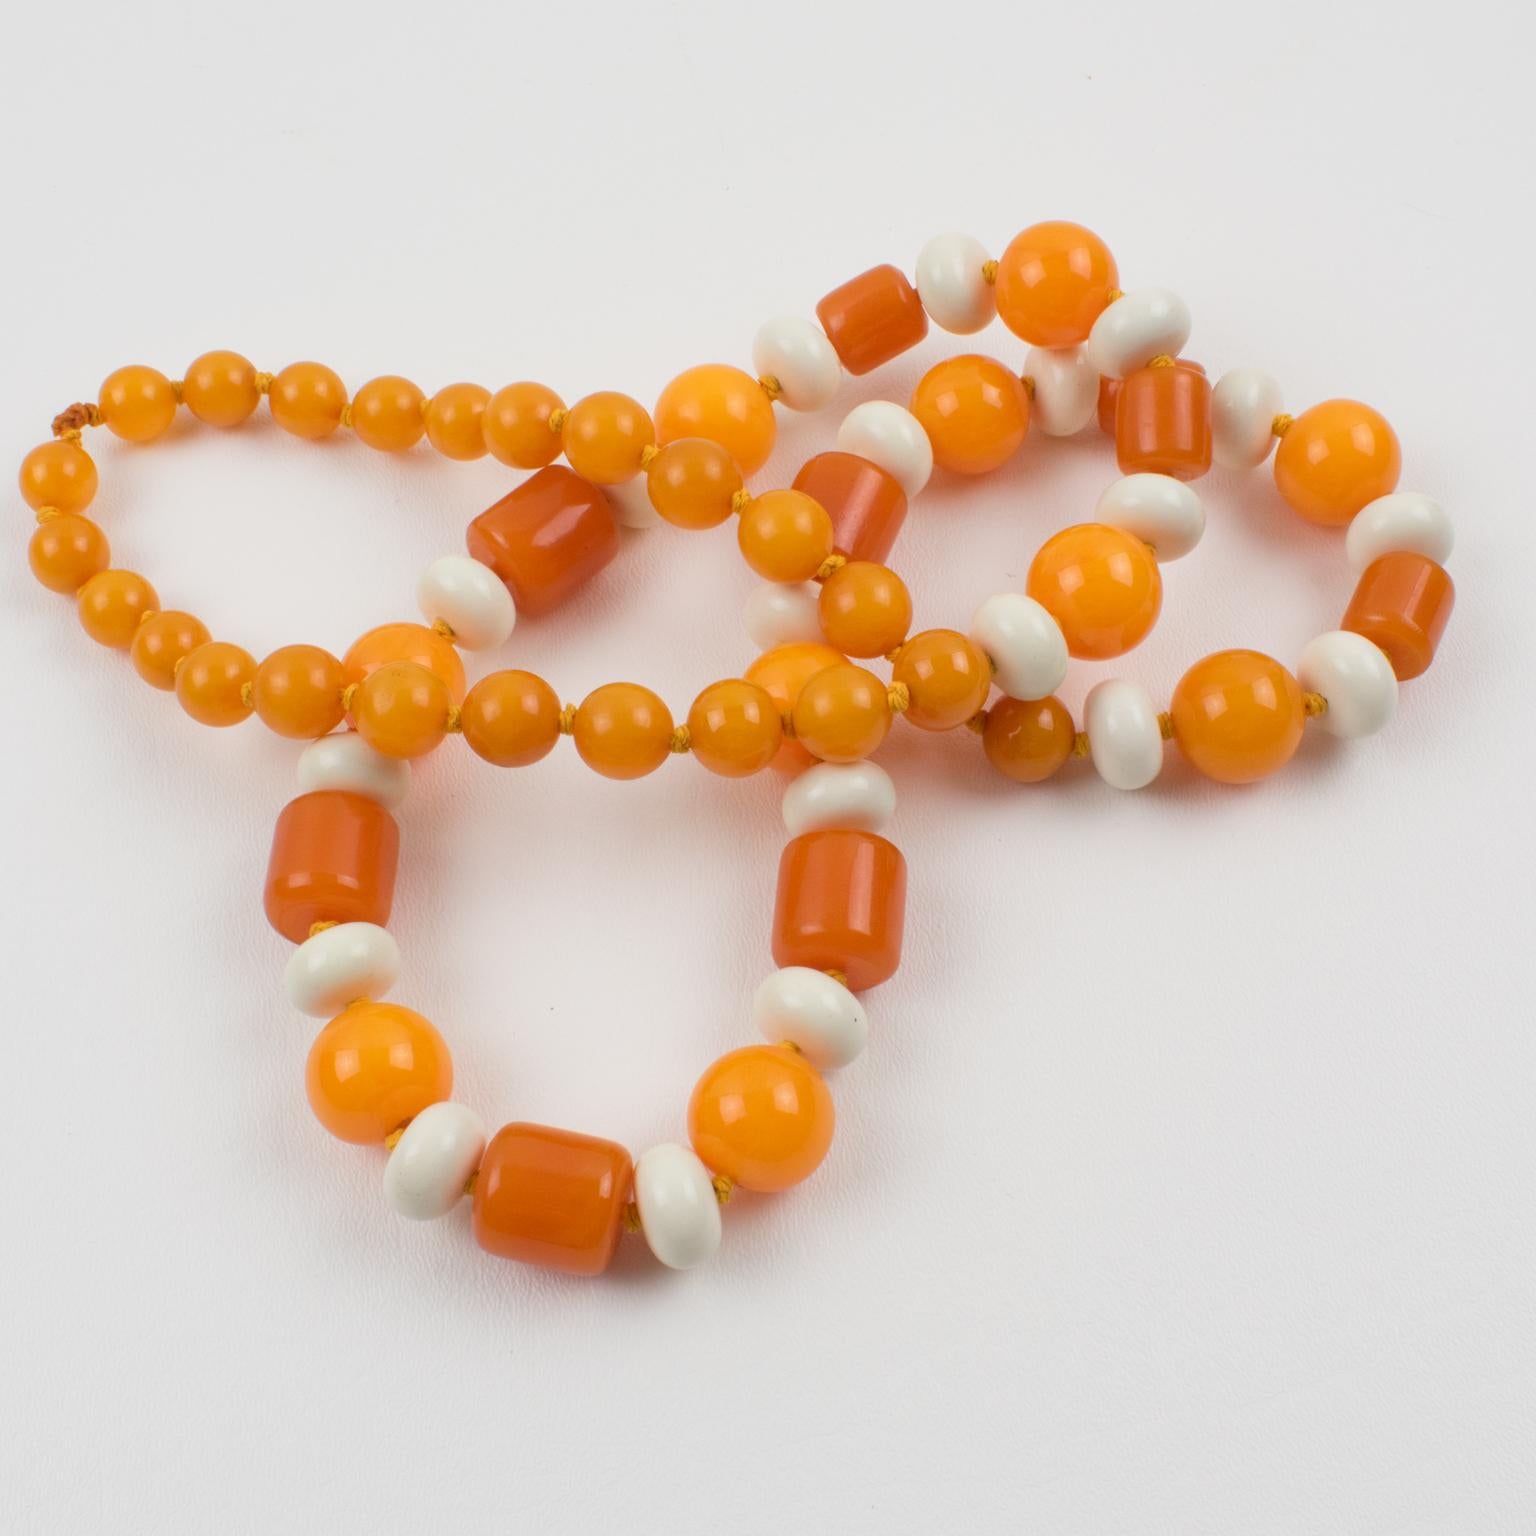 Bakelite and Lucite Long Necklace Orange and White Colors For Sale 3